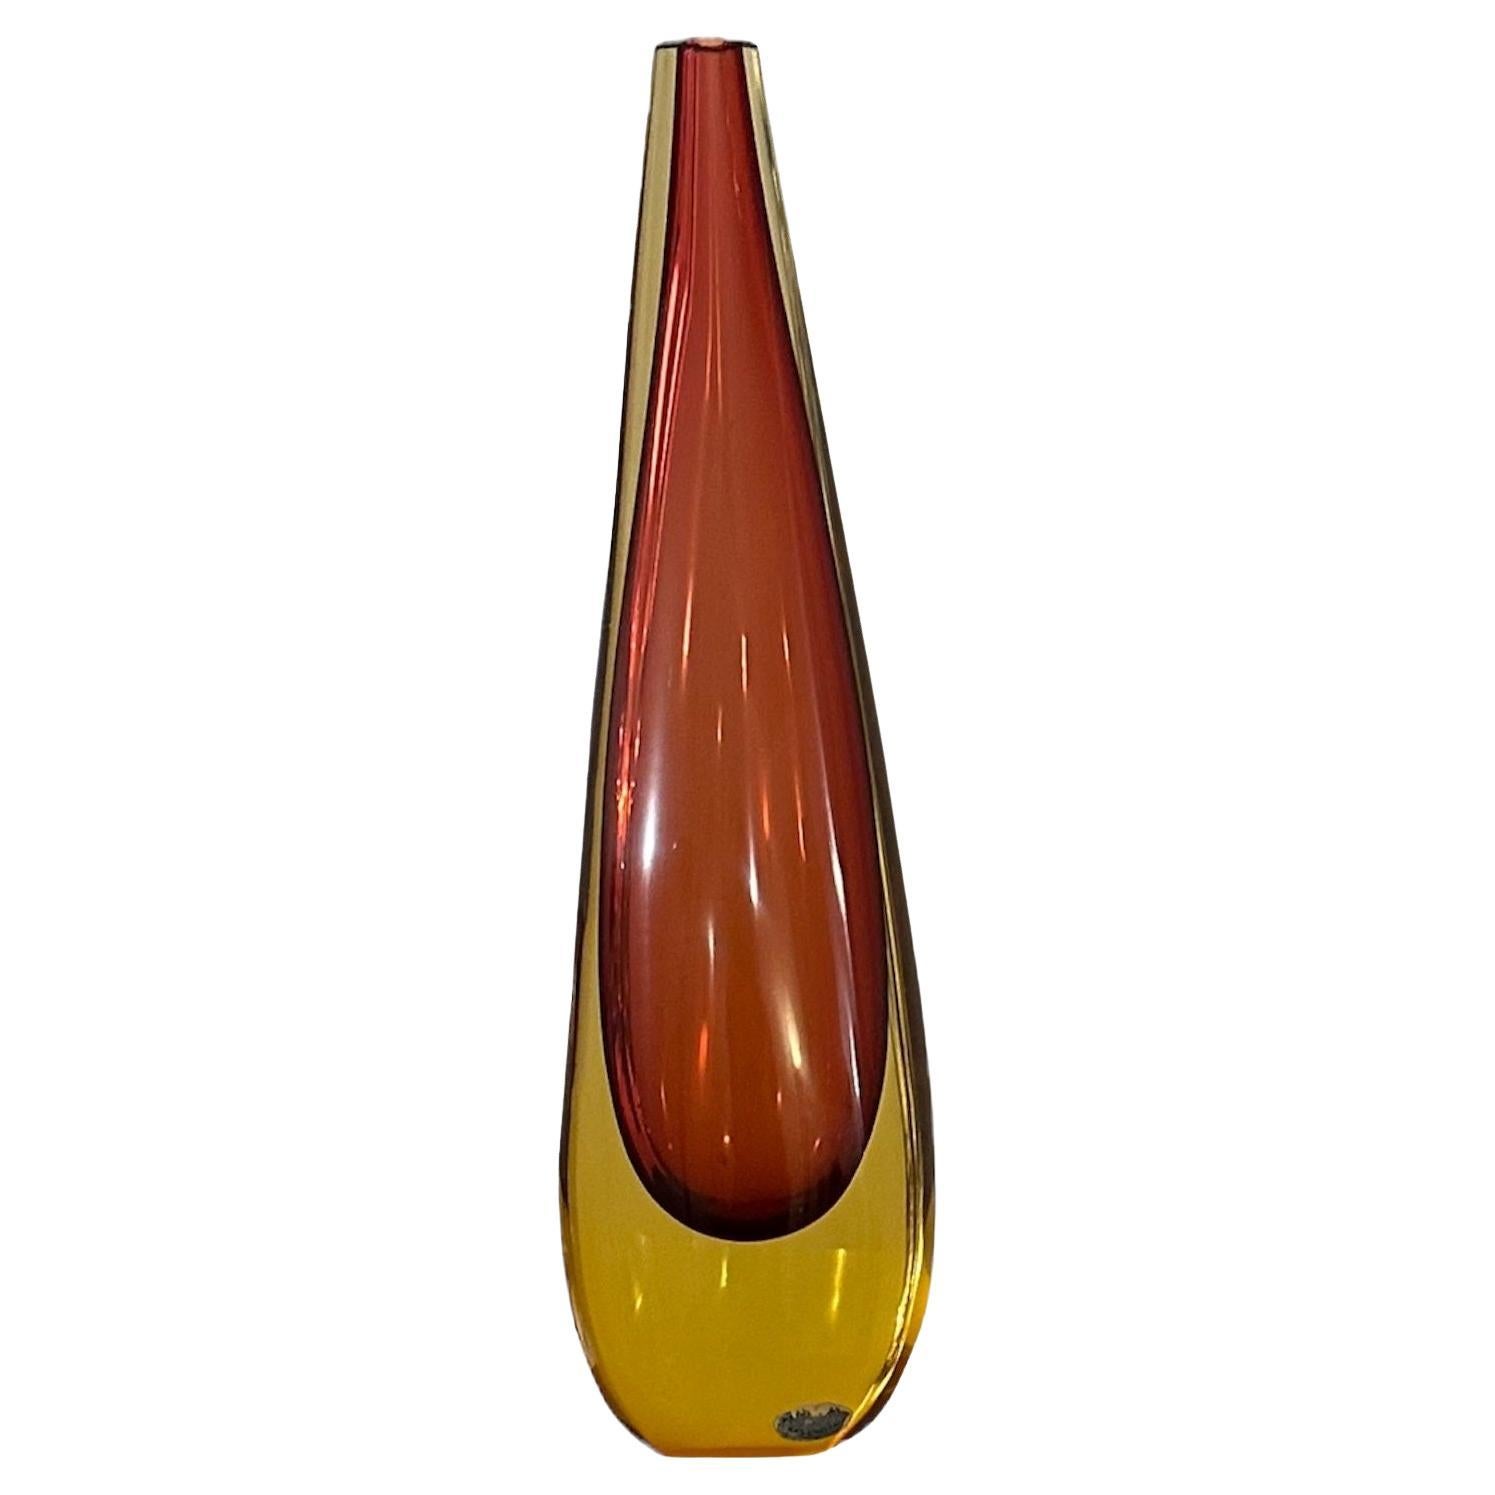 Amaizing Murano , 1930, Style Art Deco, Label : Made Murano Glass made in Italy en vente